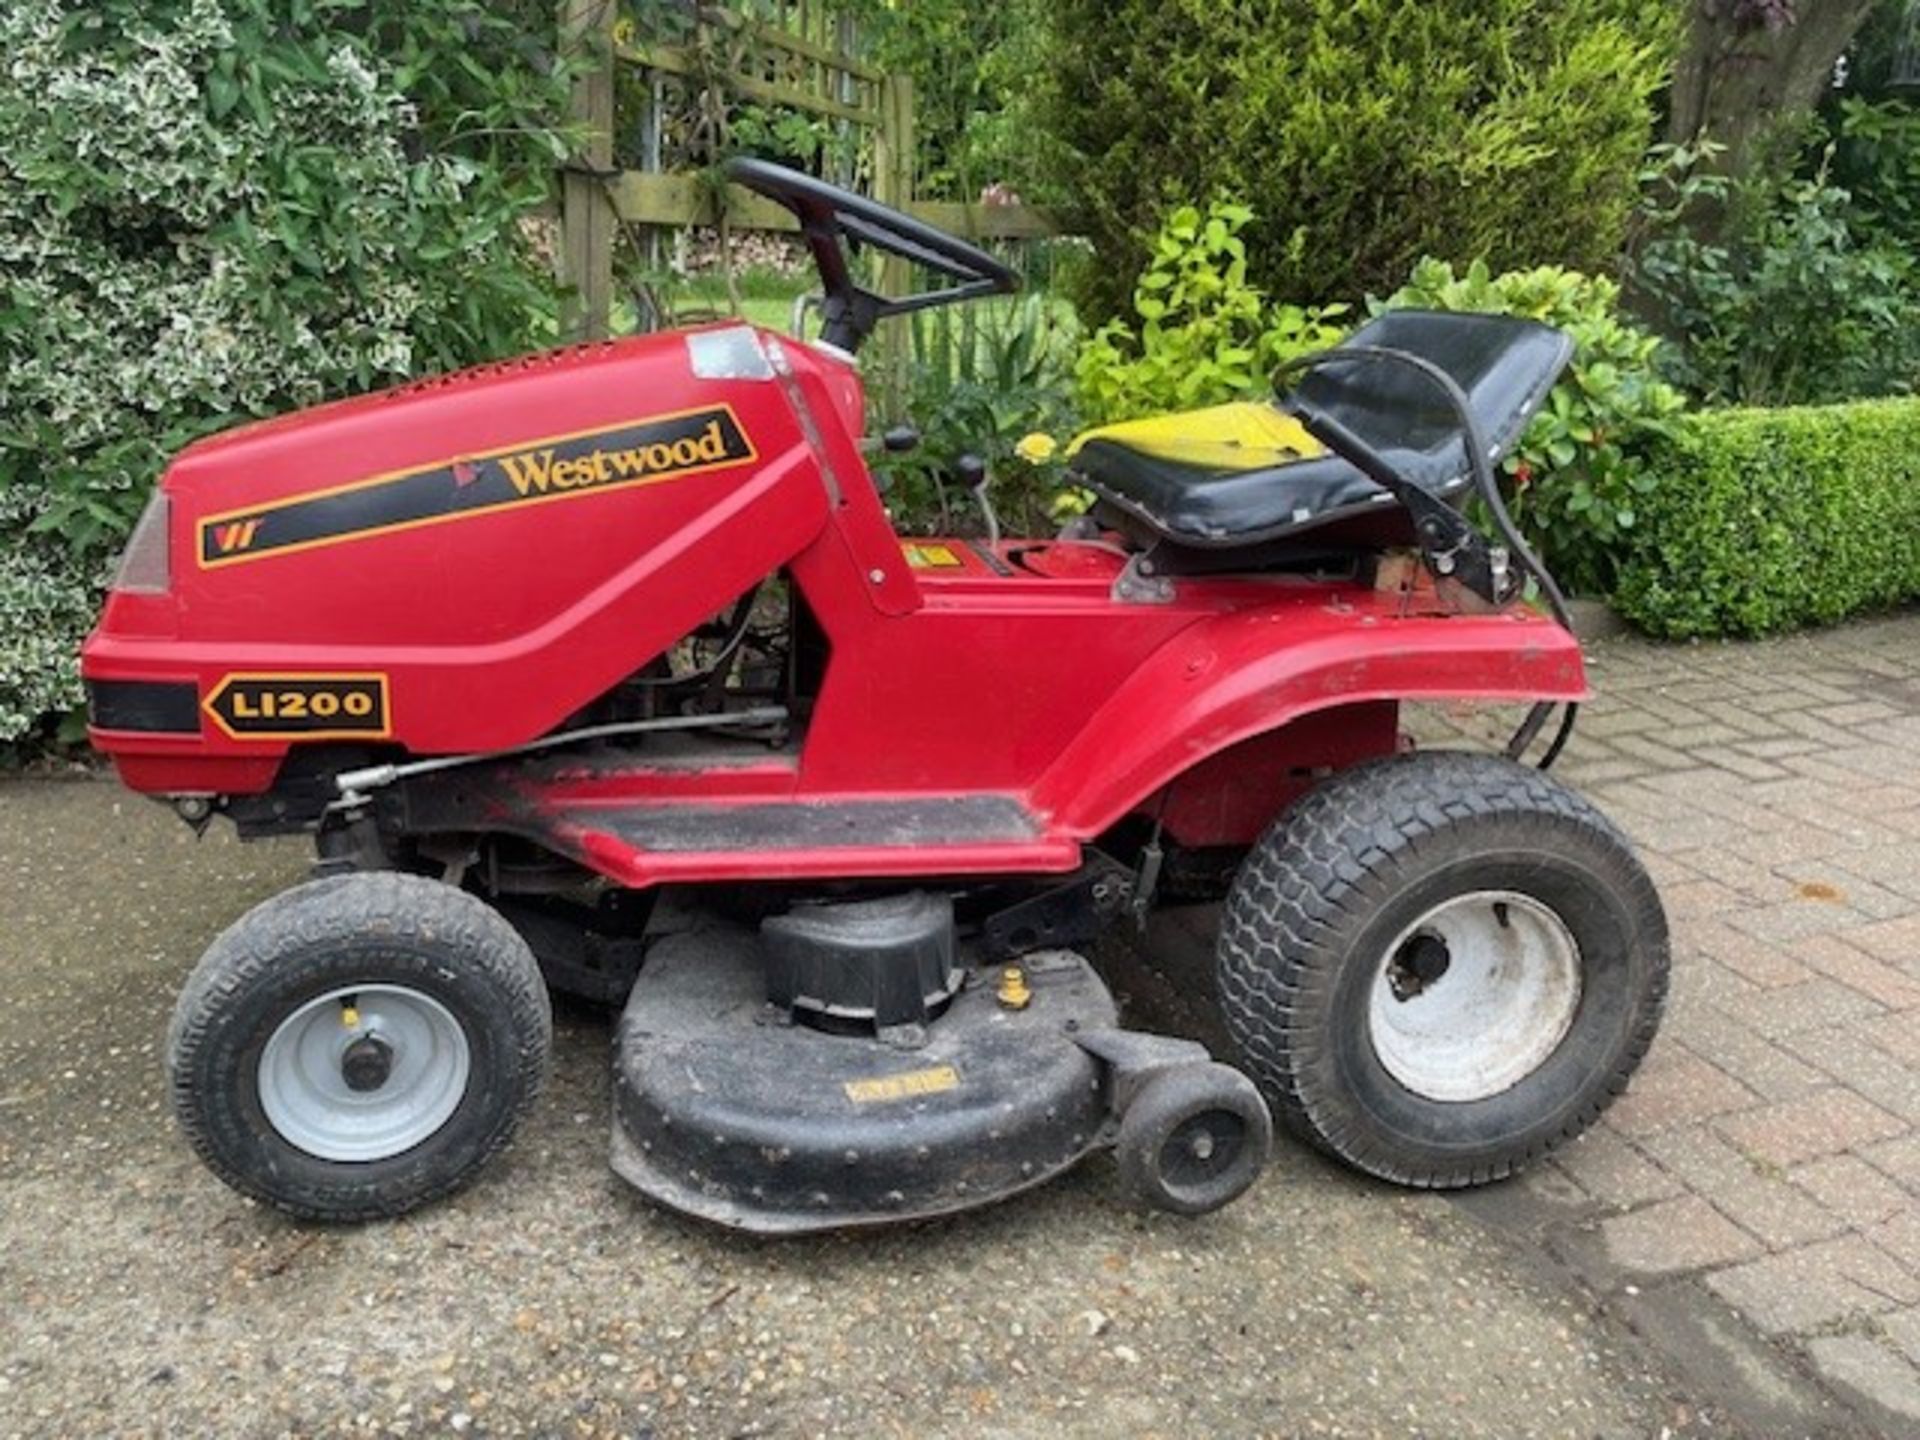 Westwood ride on lawnmower L1200 with grass collector